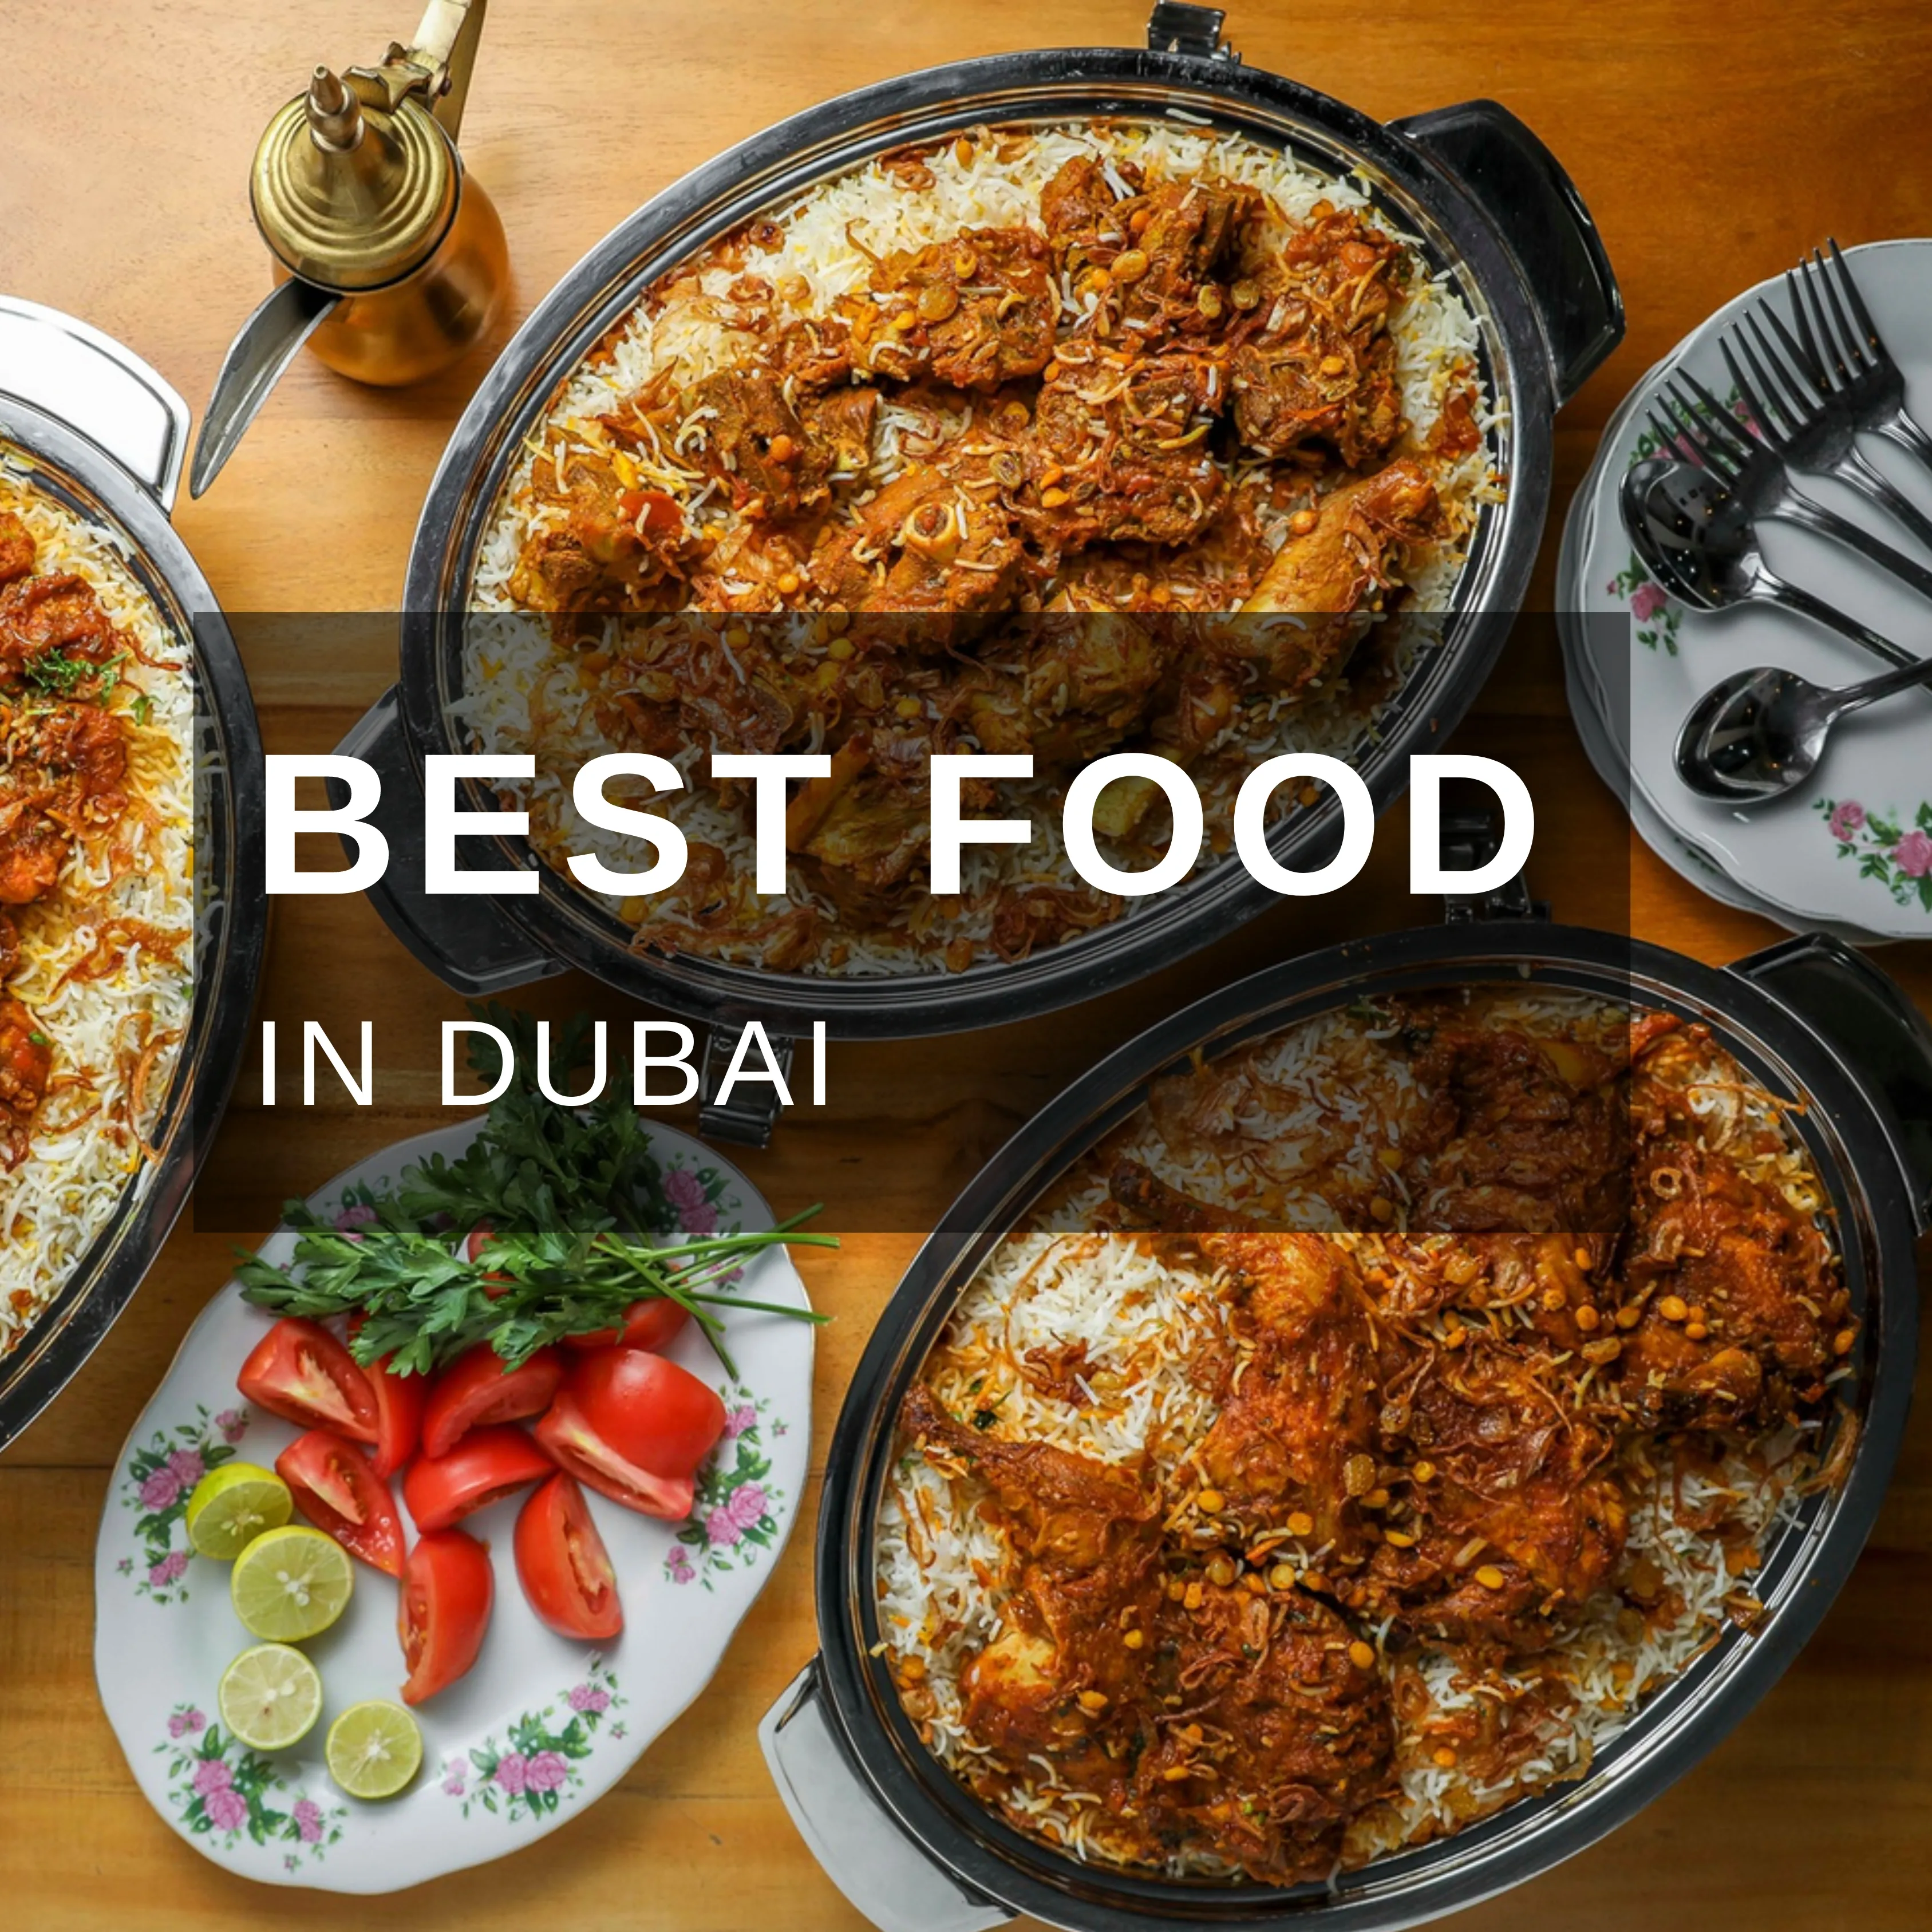 EMIRATI FOOD: TOP FOOD DISHES YOU MUST TRY